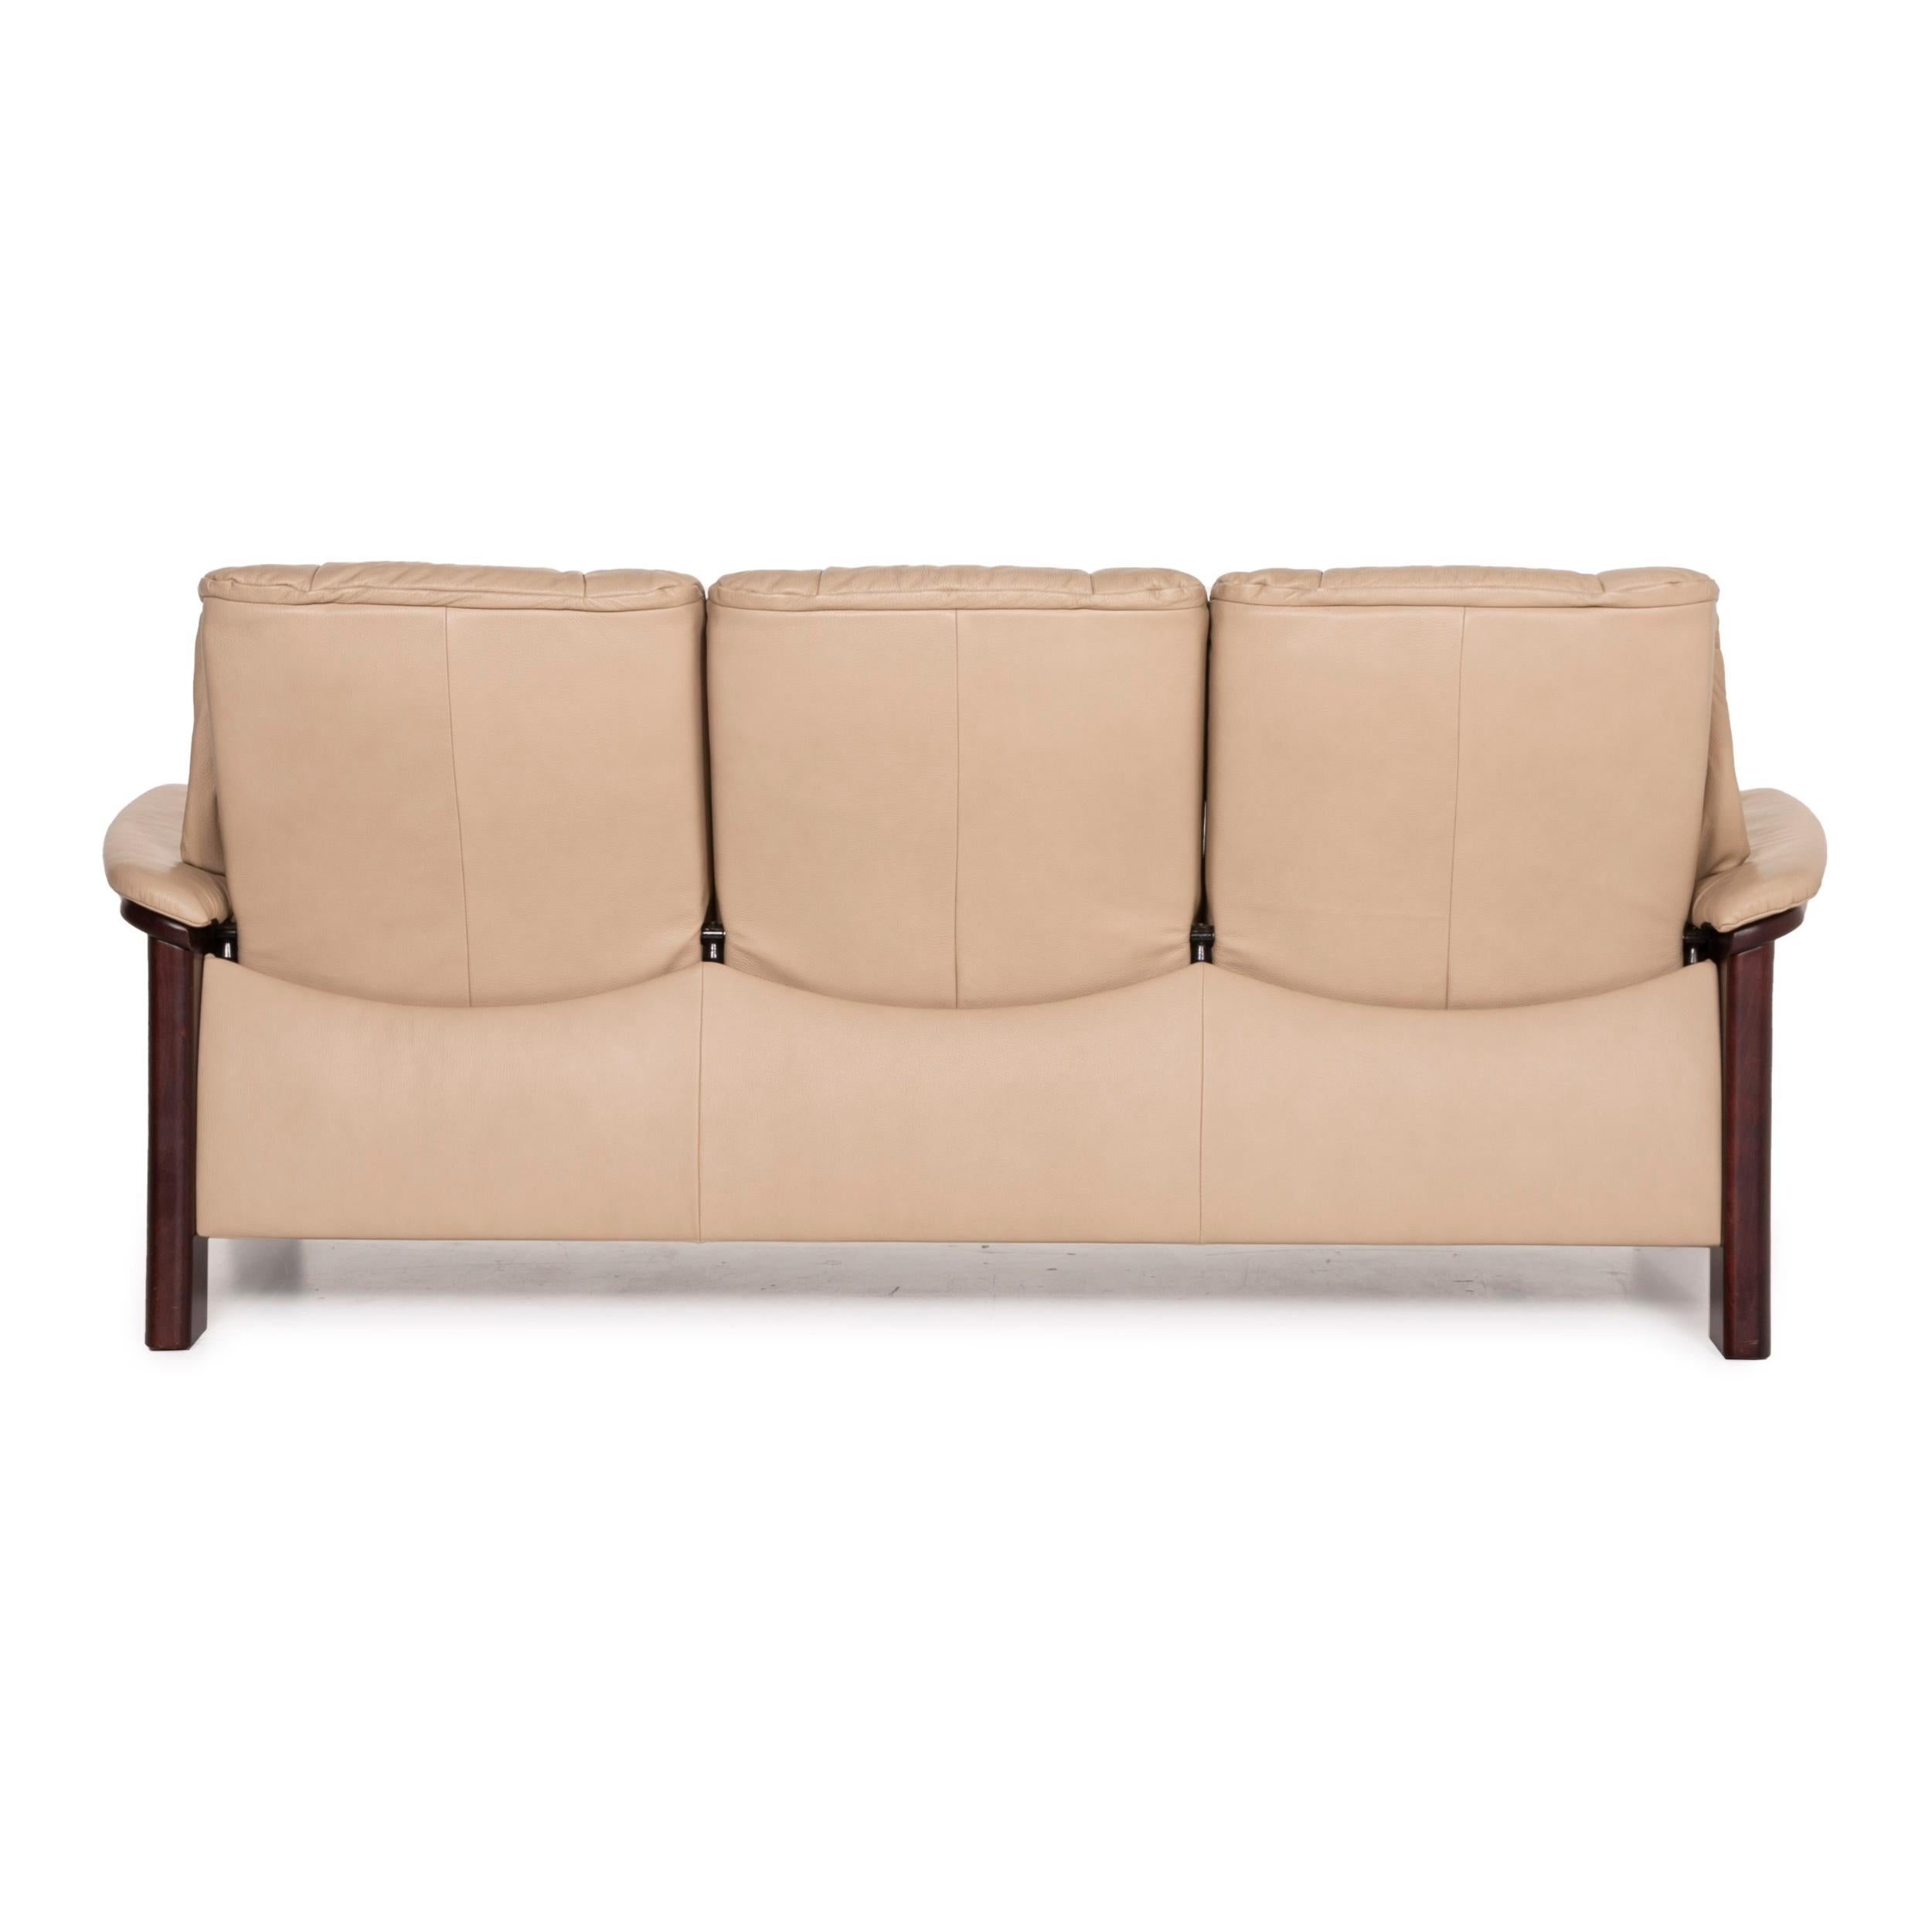 Stressless Windsor Leather Sofa Beige Three-Seater Relax Function 3